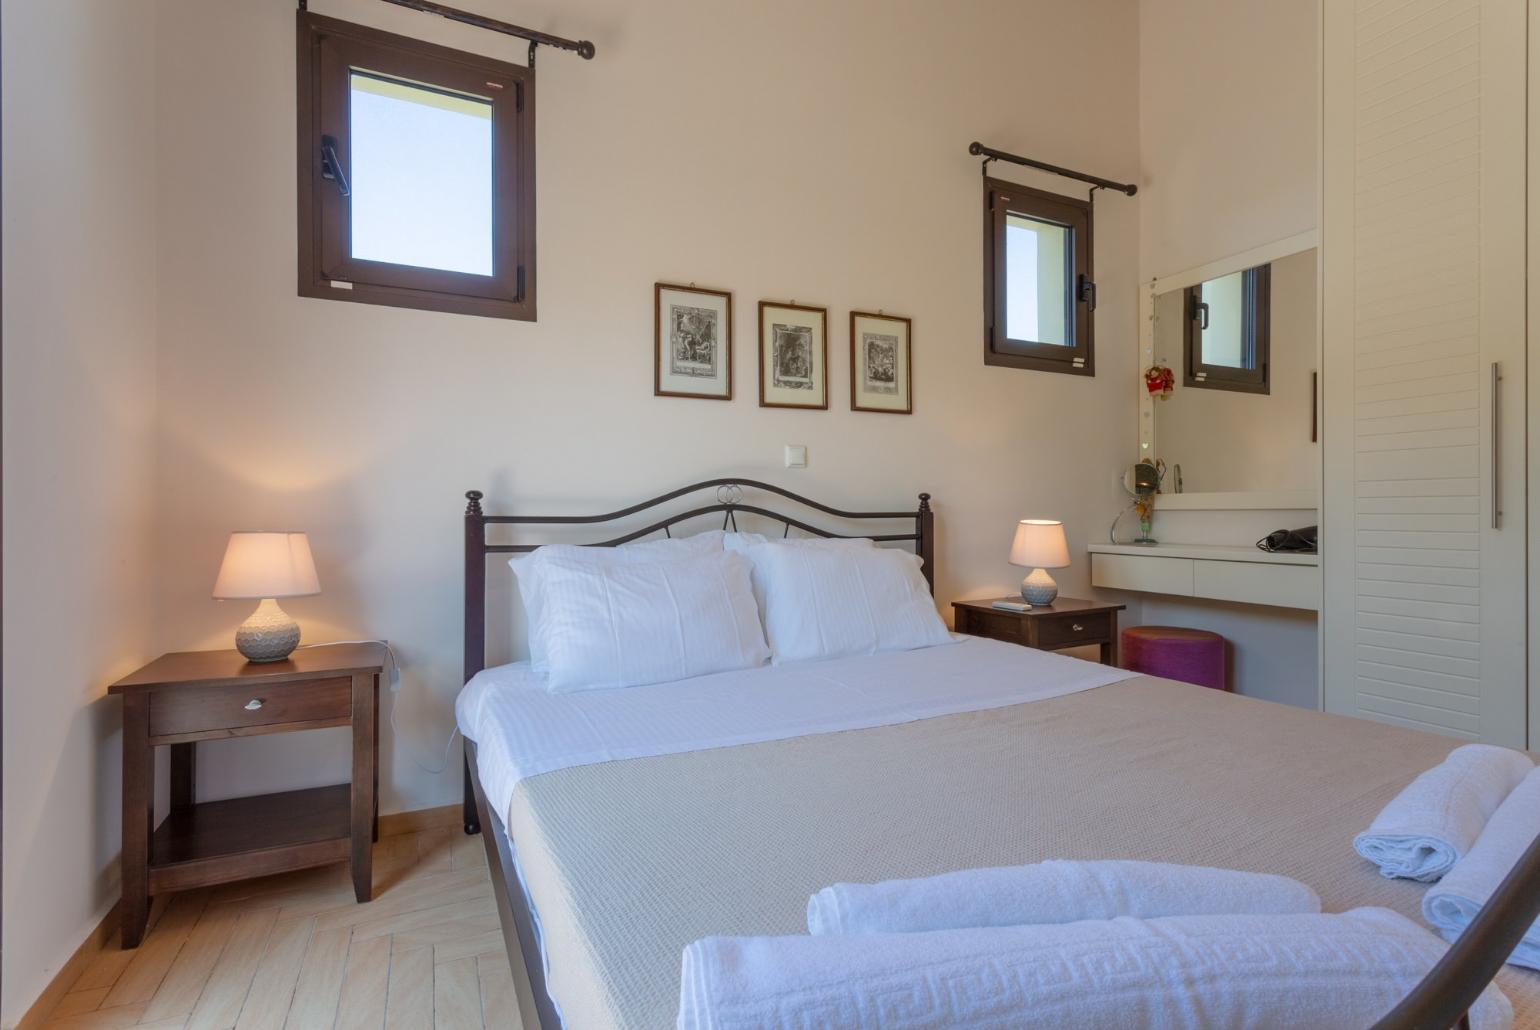 Double bedroom with en suite bathroom, A/C, and balcony access with sea views